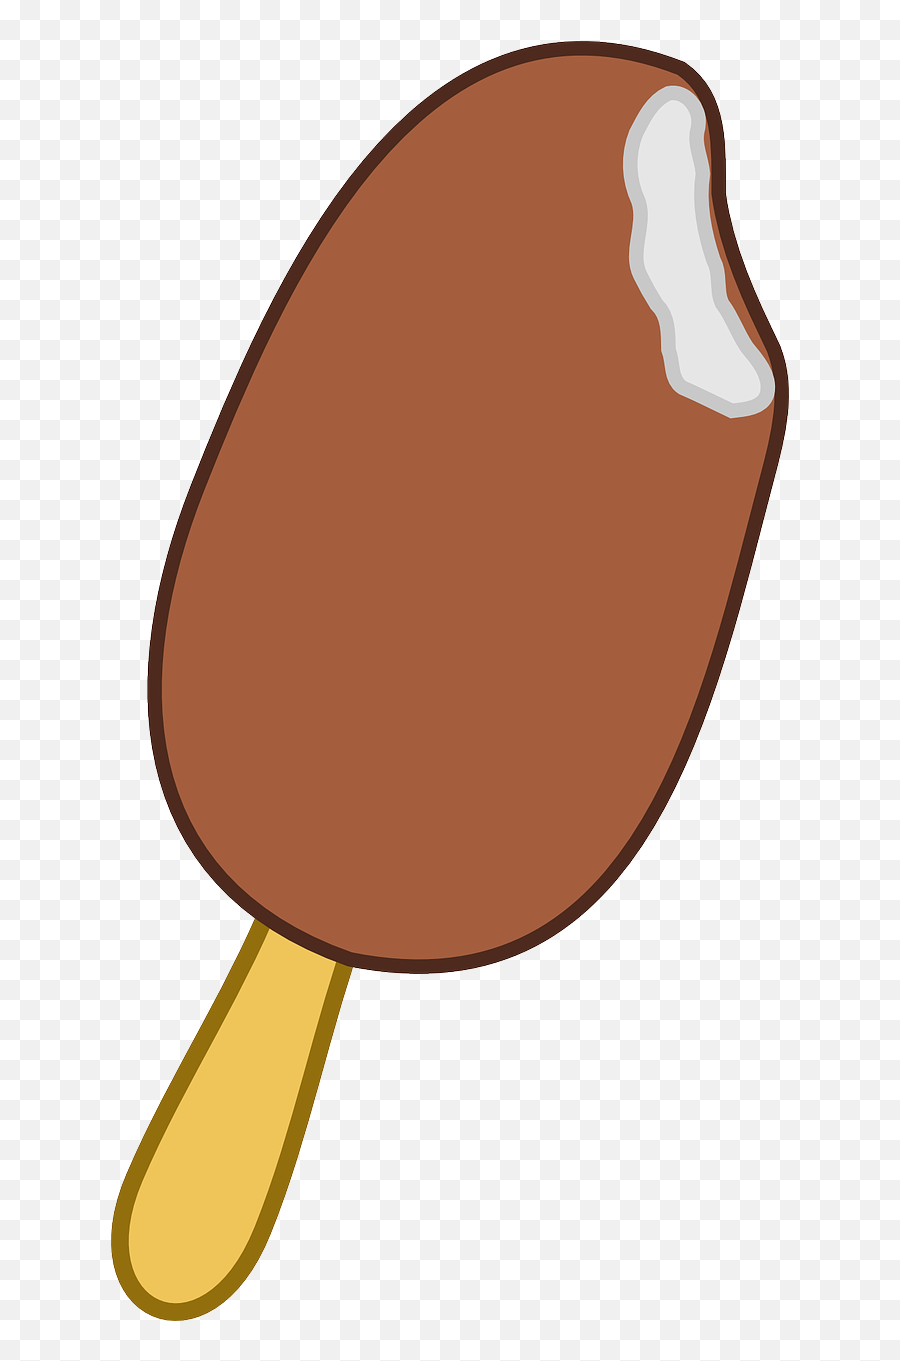 Popsicle Free To Use Cliparts - Clip Art Ice Lolly Emoji,Melting Popsicle Emoji